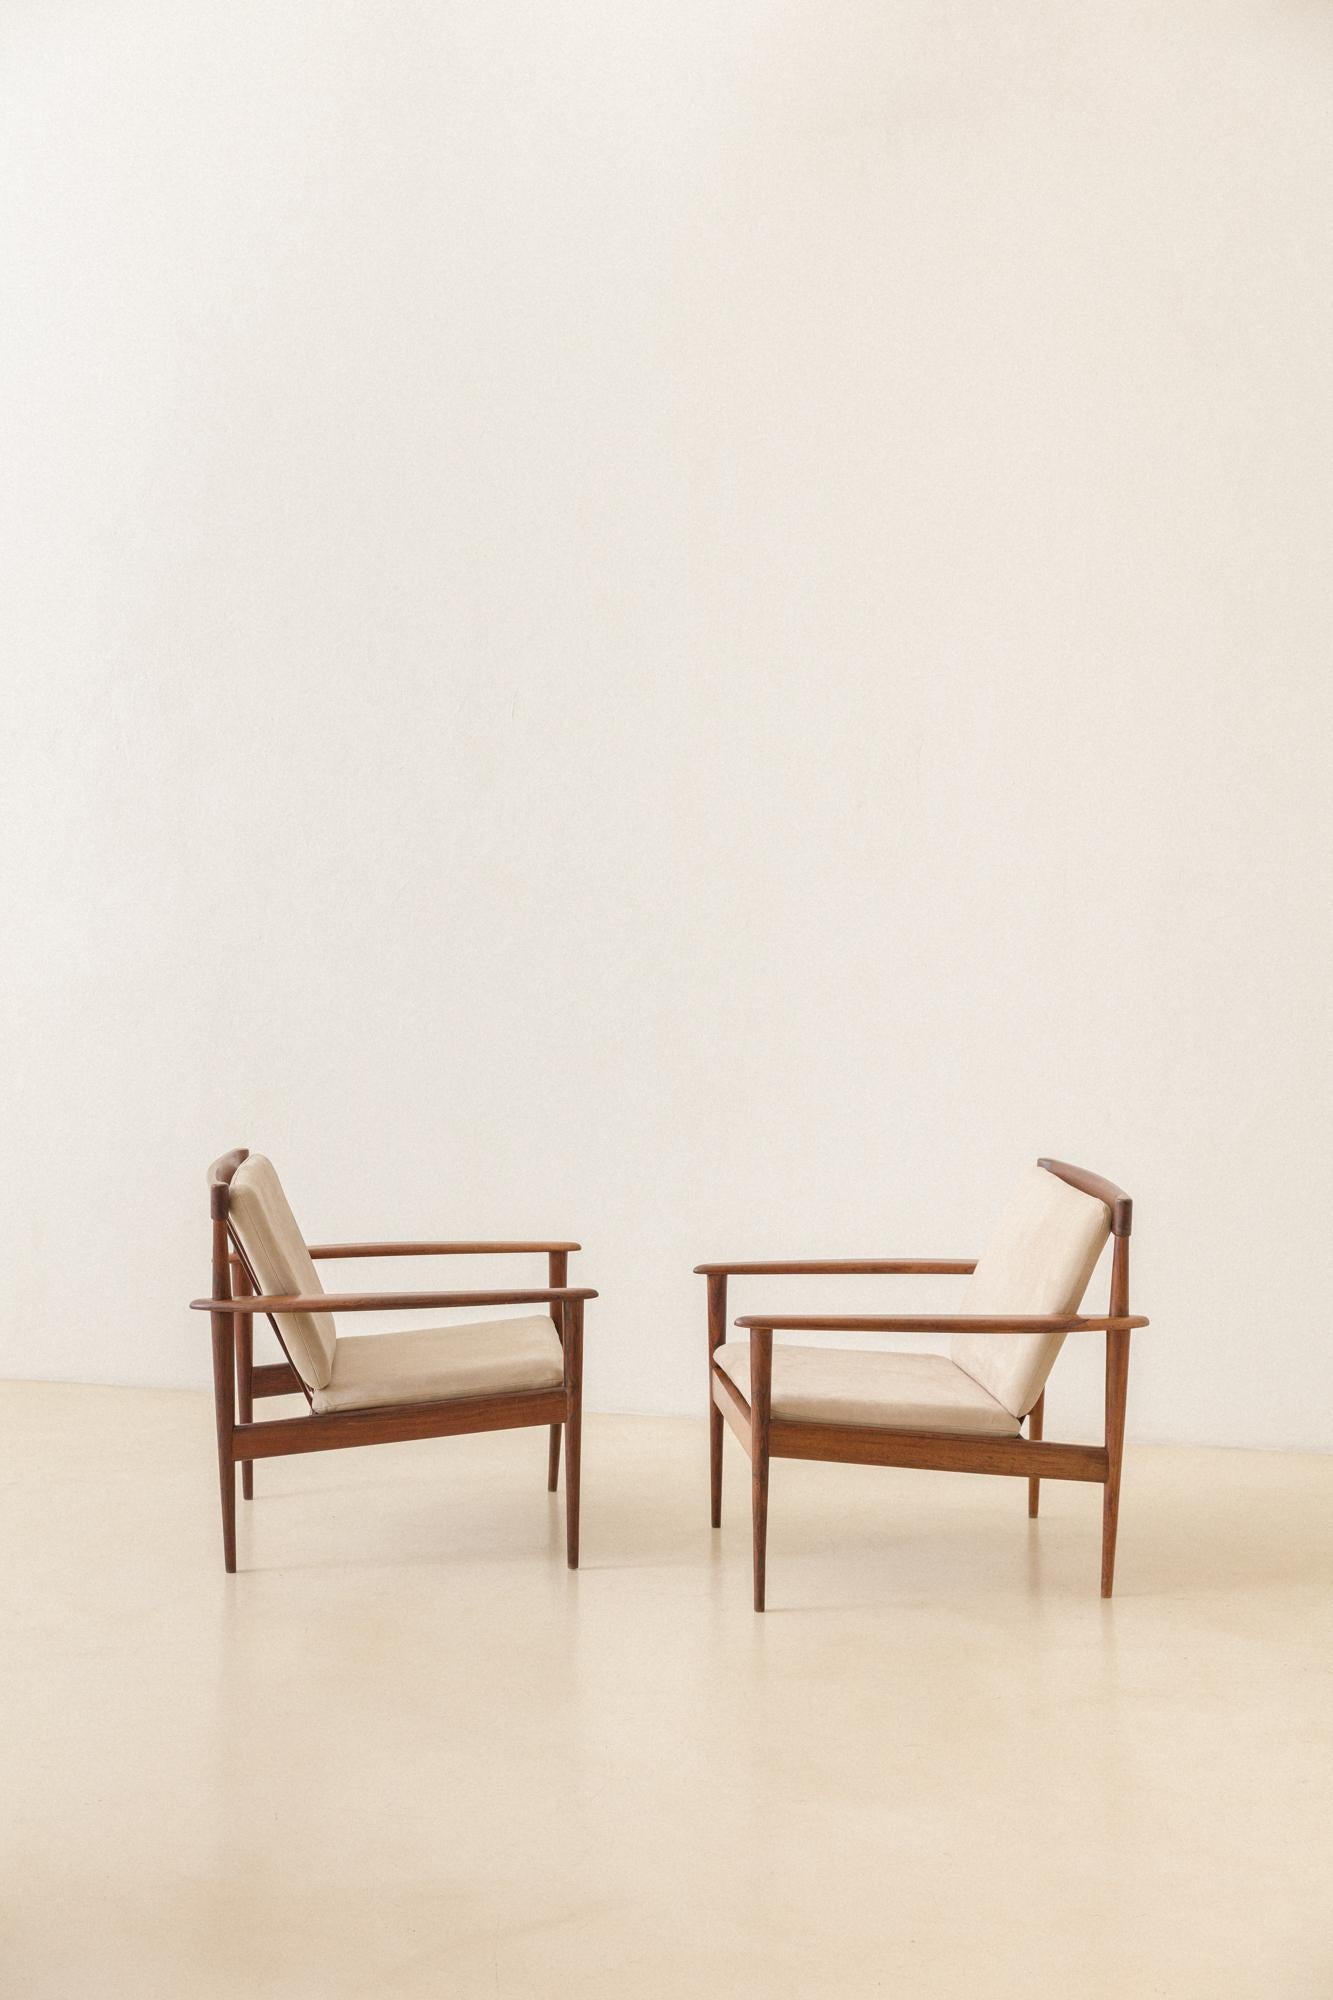 Turned Pair of Armchairs by Grete Jalk/Rino Levi, c. 1951, Brazilian Midcentury Design For Sale